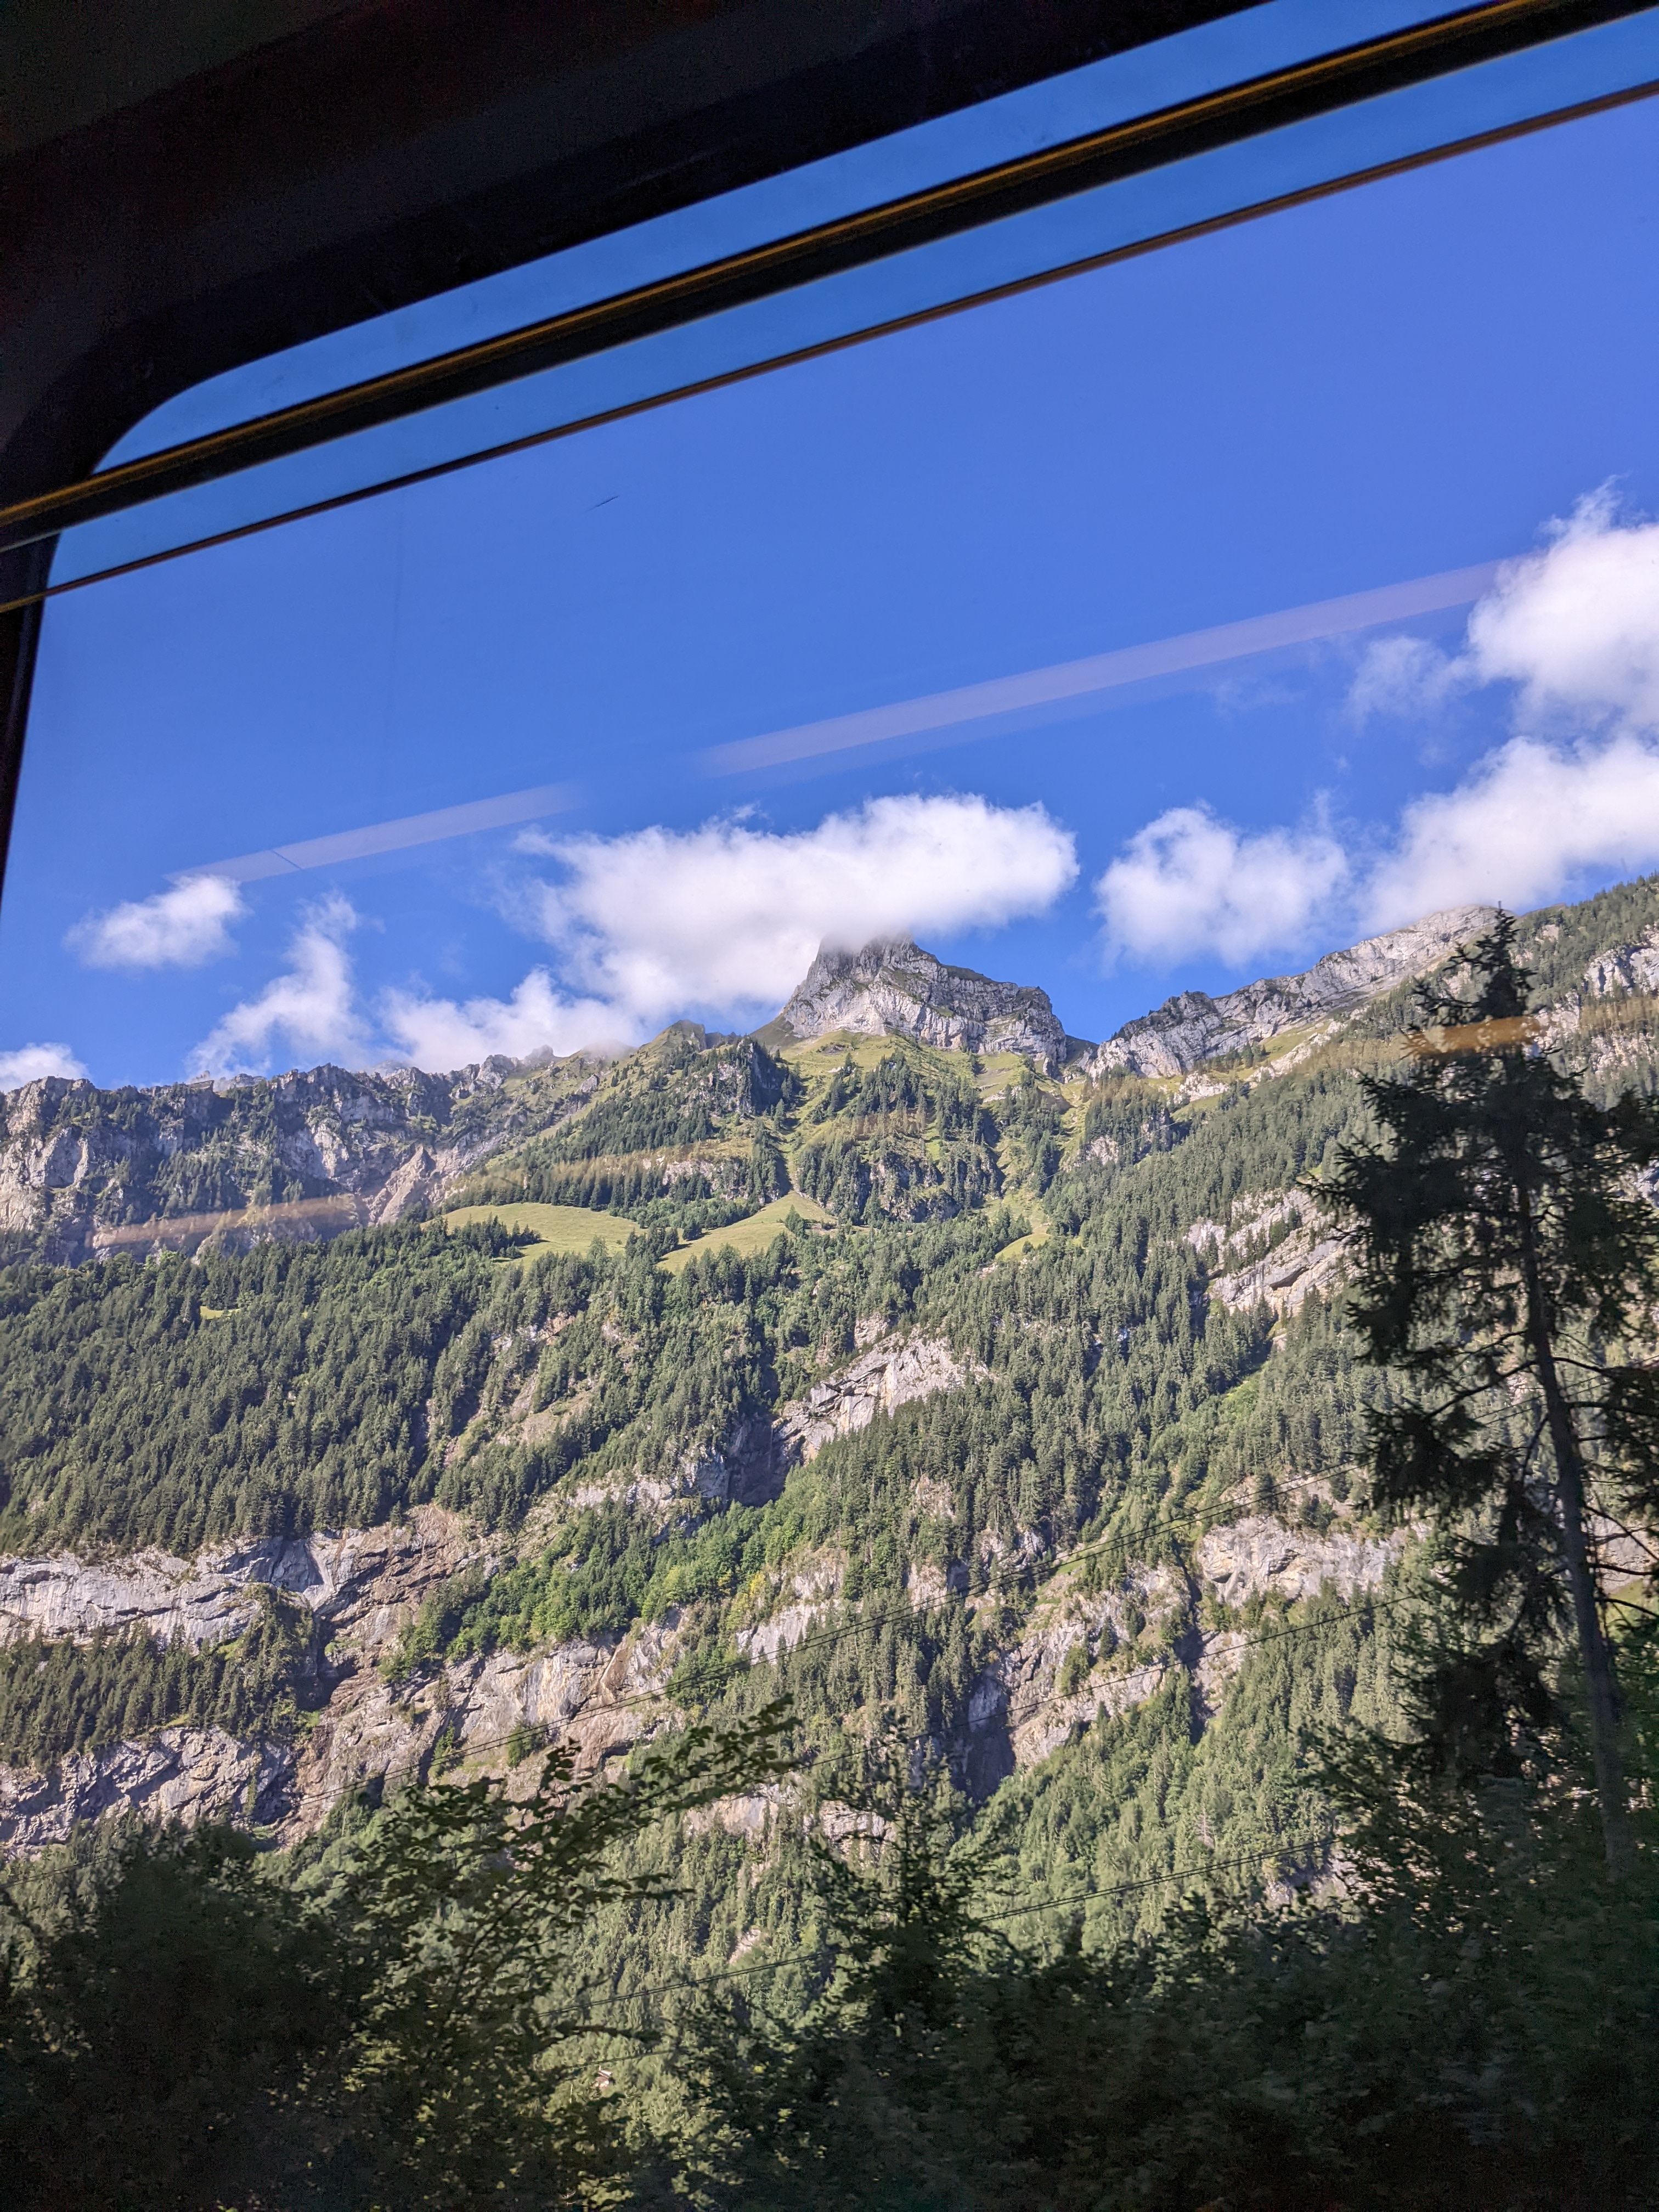 Train to Kanderstag